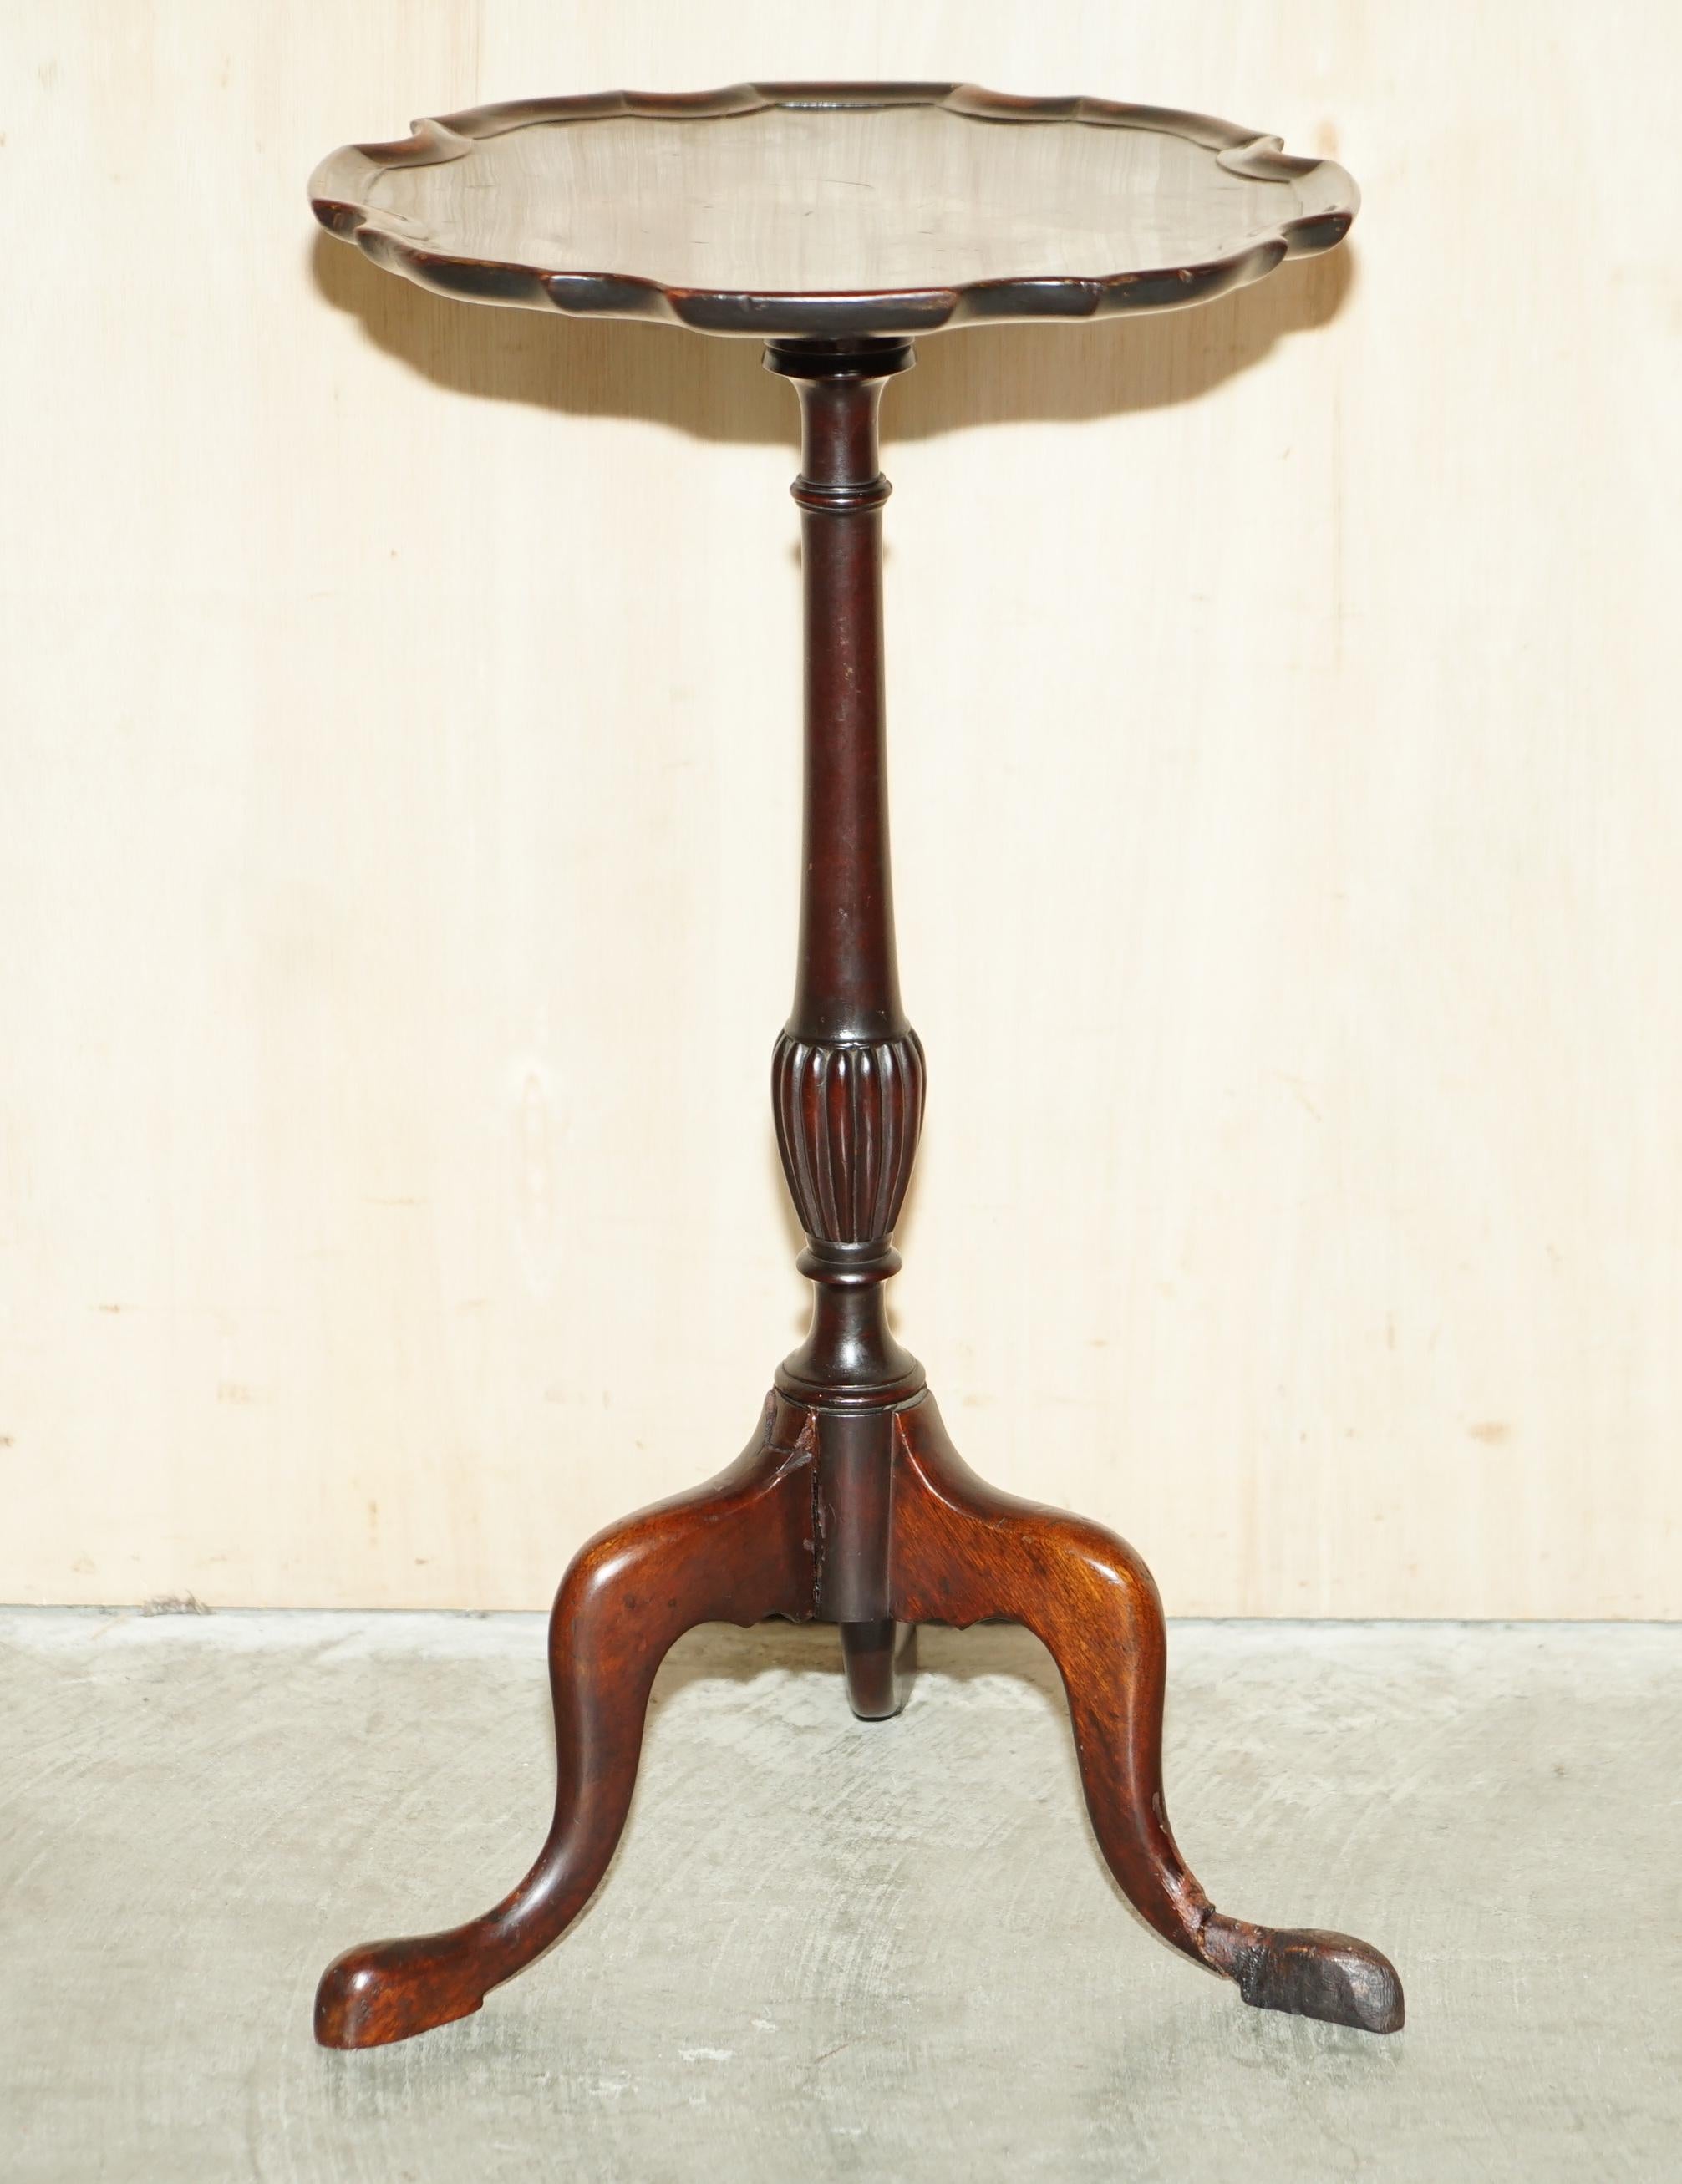 Royal House Antiques

Royal House Antiques is delighted to offer for sale this very nice antique Pie Crust edge side end lamp wine table with repaired base

Please note the delivery fee listed is just a guide, it covers within the M25 only for the